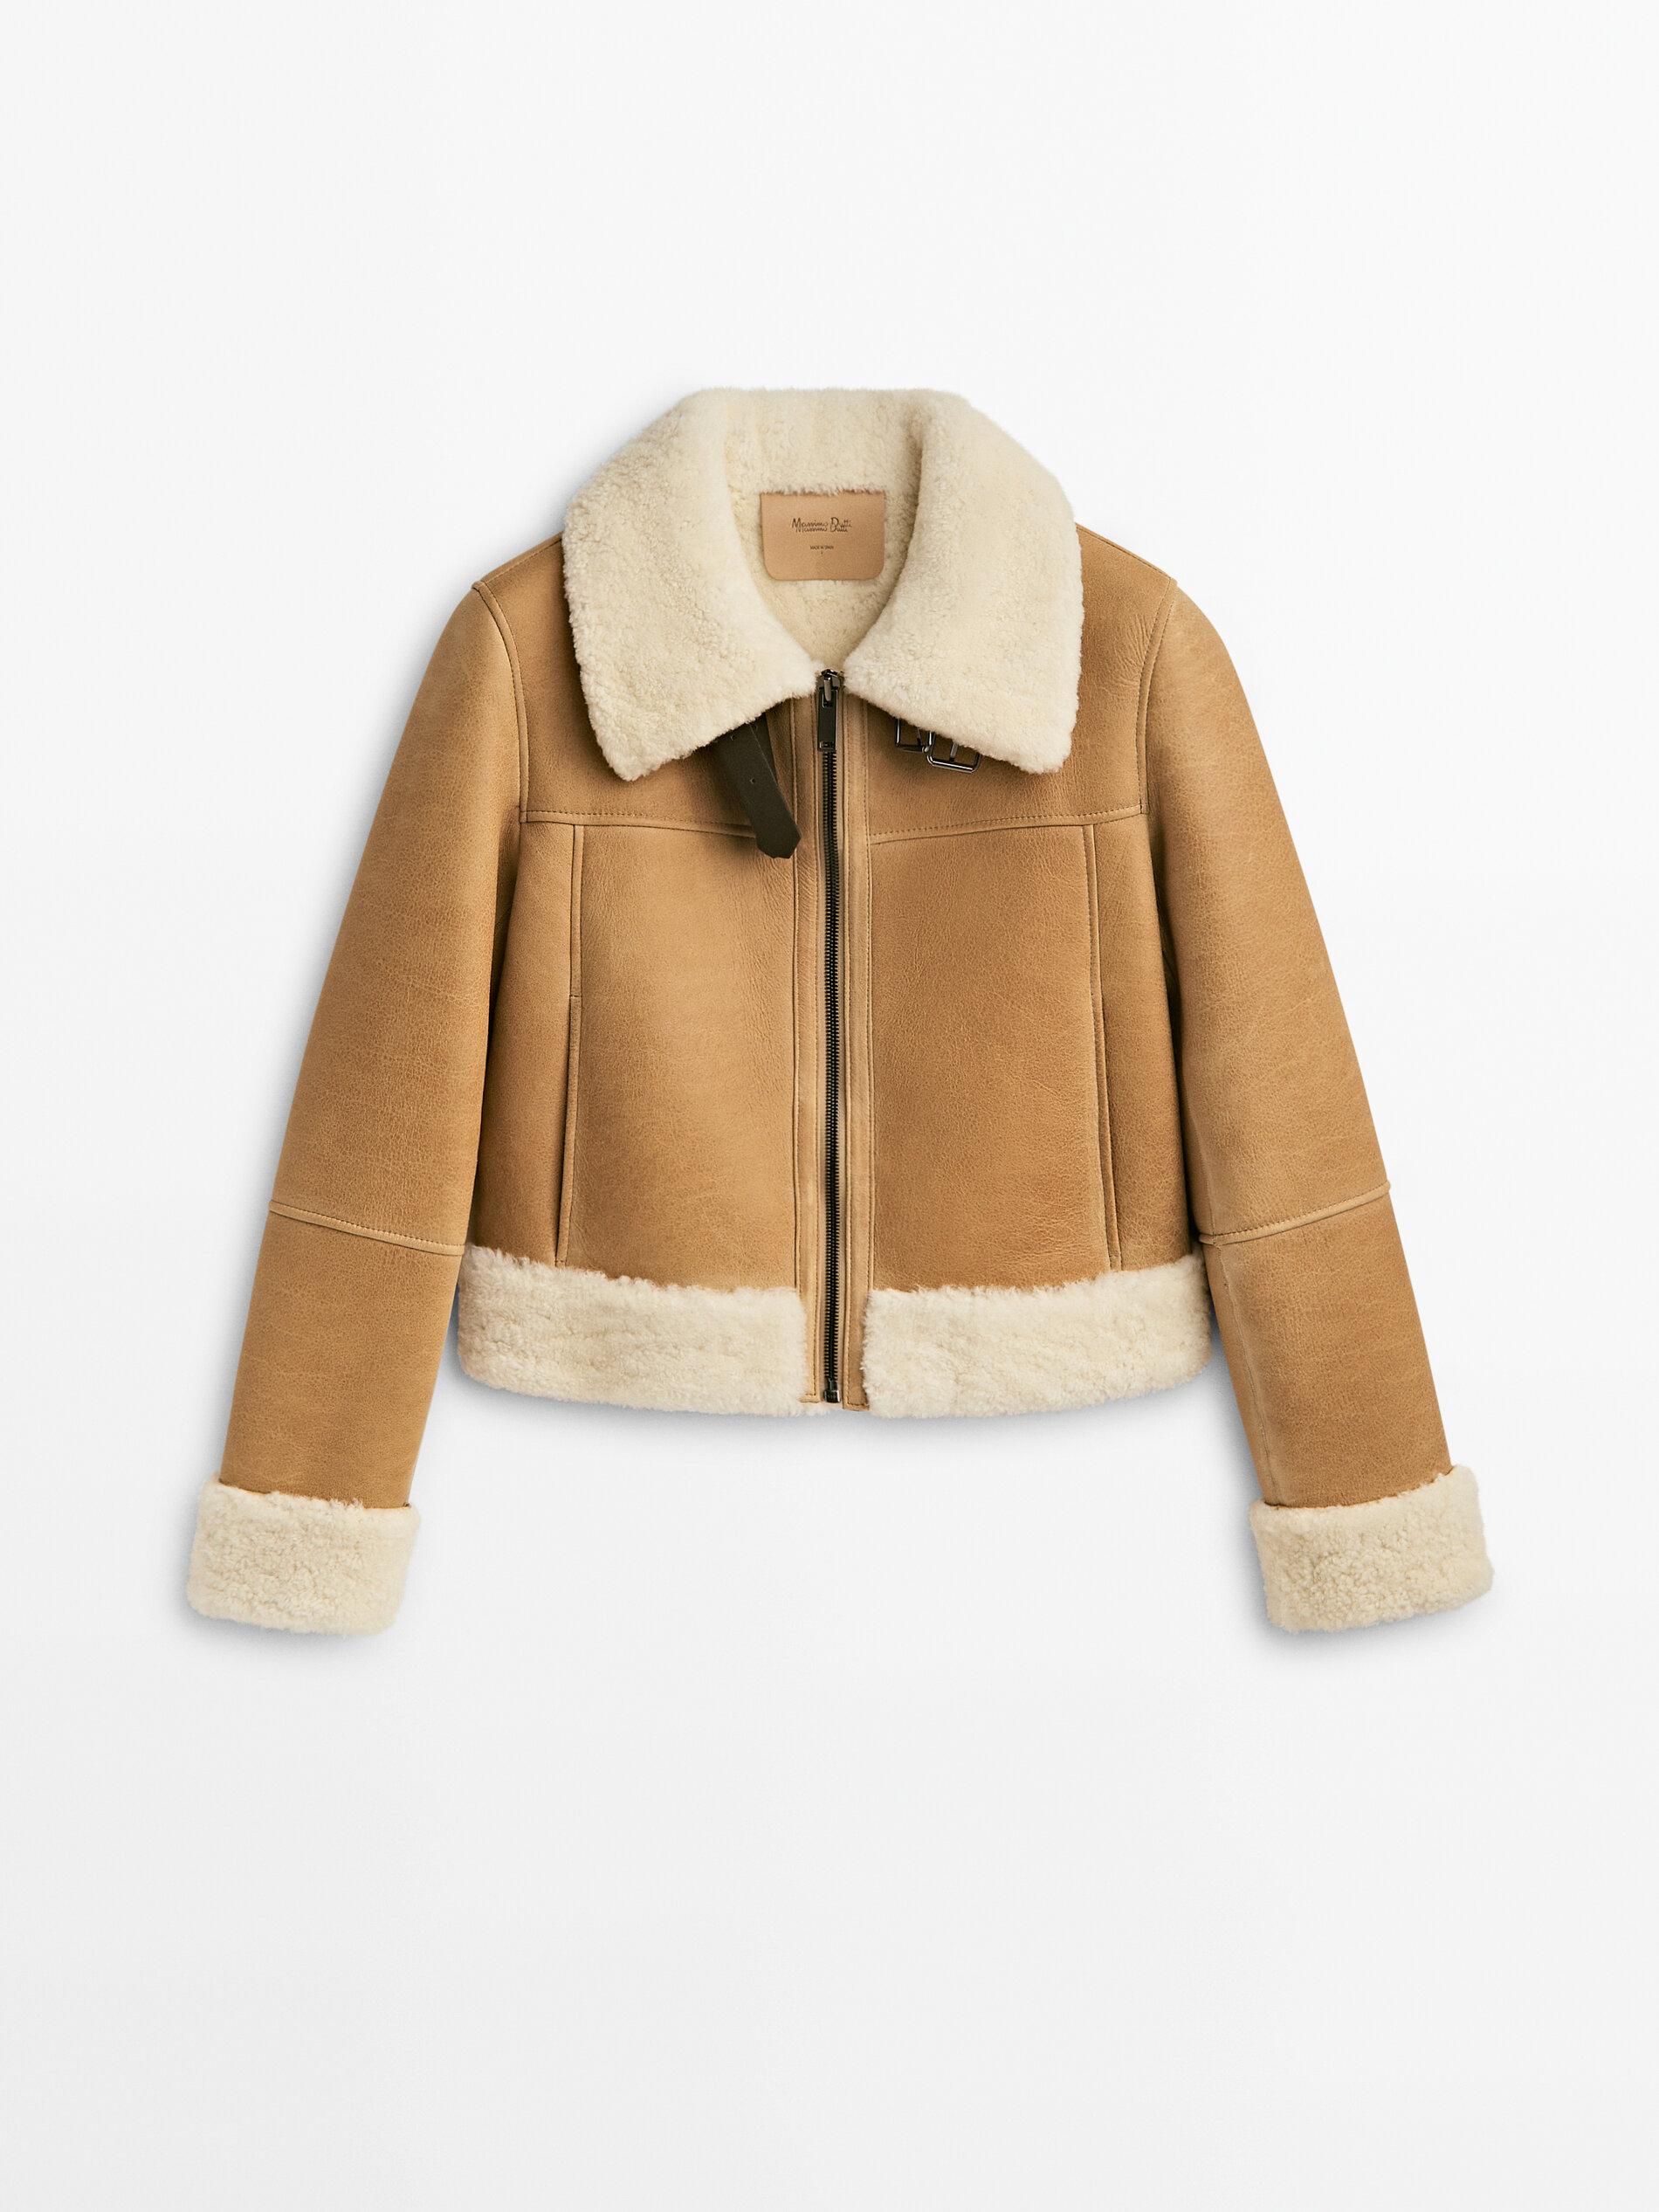 MASSIMO DUTTI Mouton Leather Aviator Jacket in Natural | Lyst